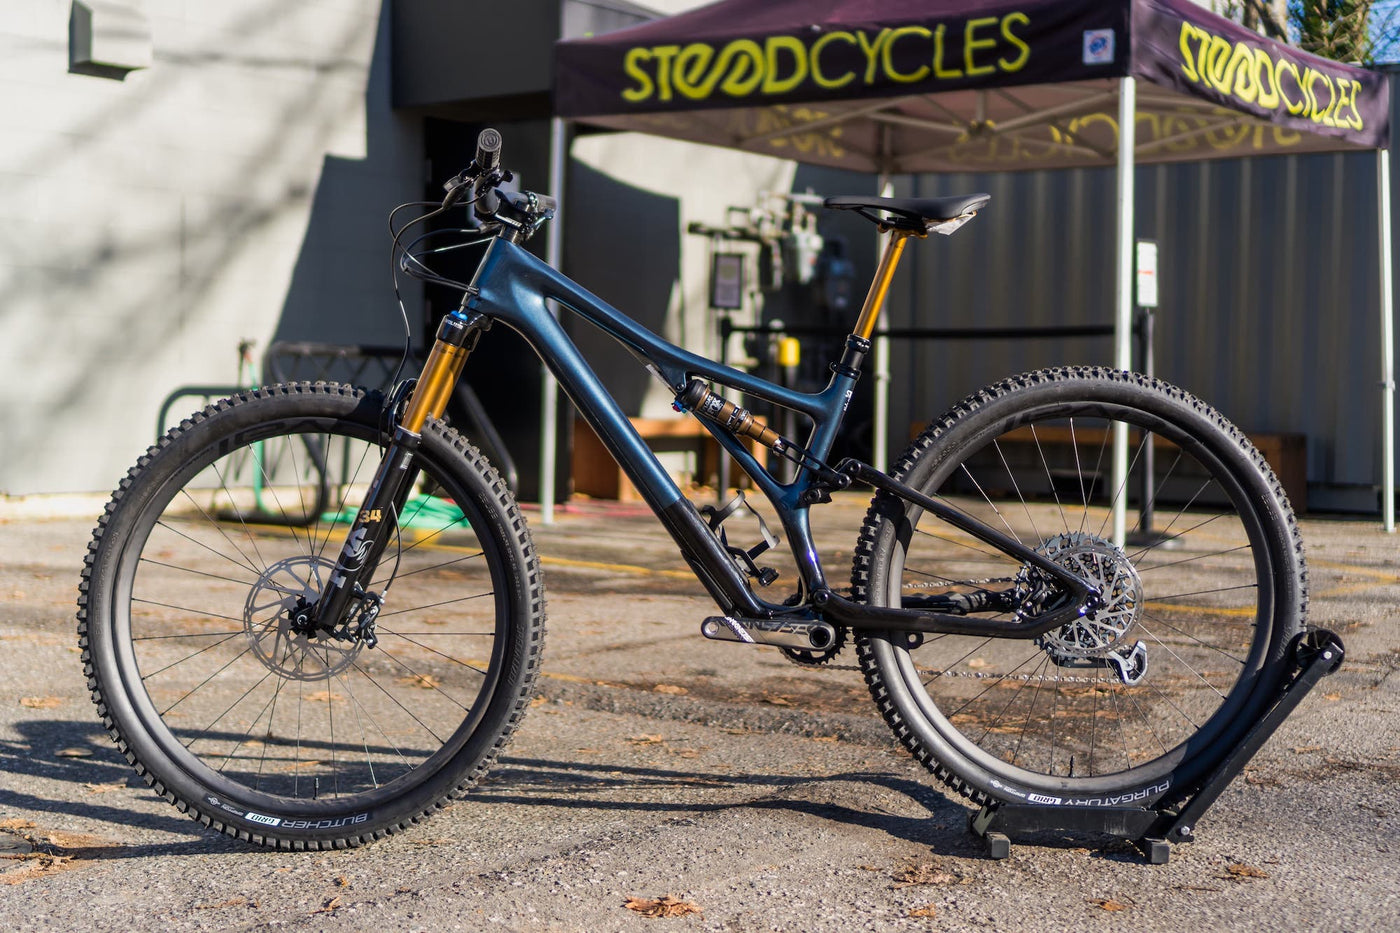 The 2021 Specialized Stumpjumper is the Ultimate All-Round Trail Bike